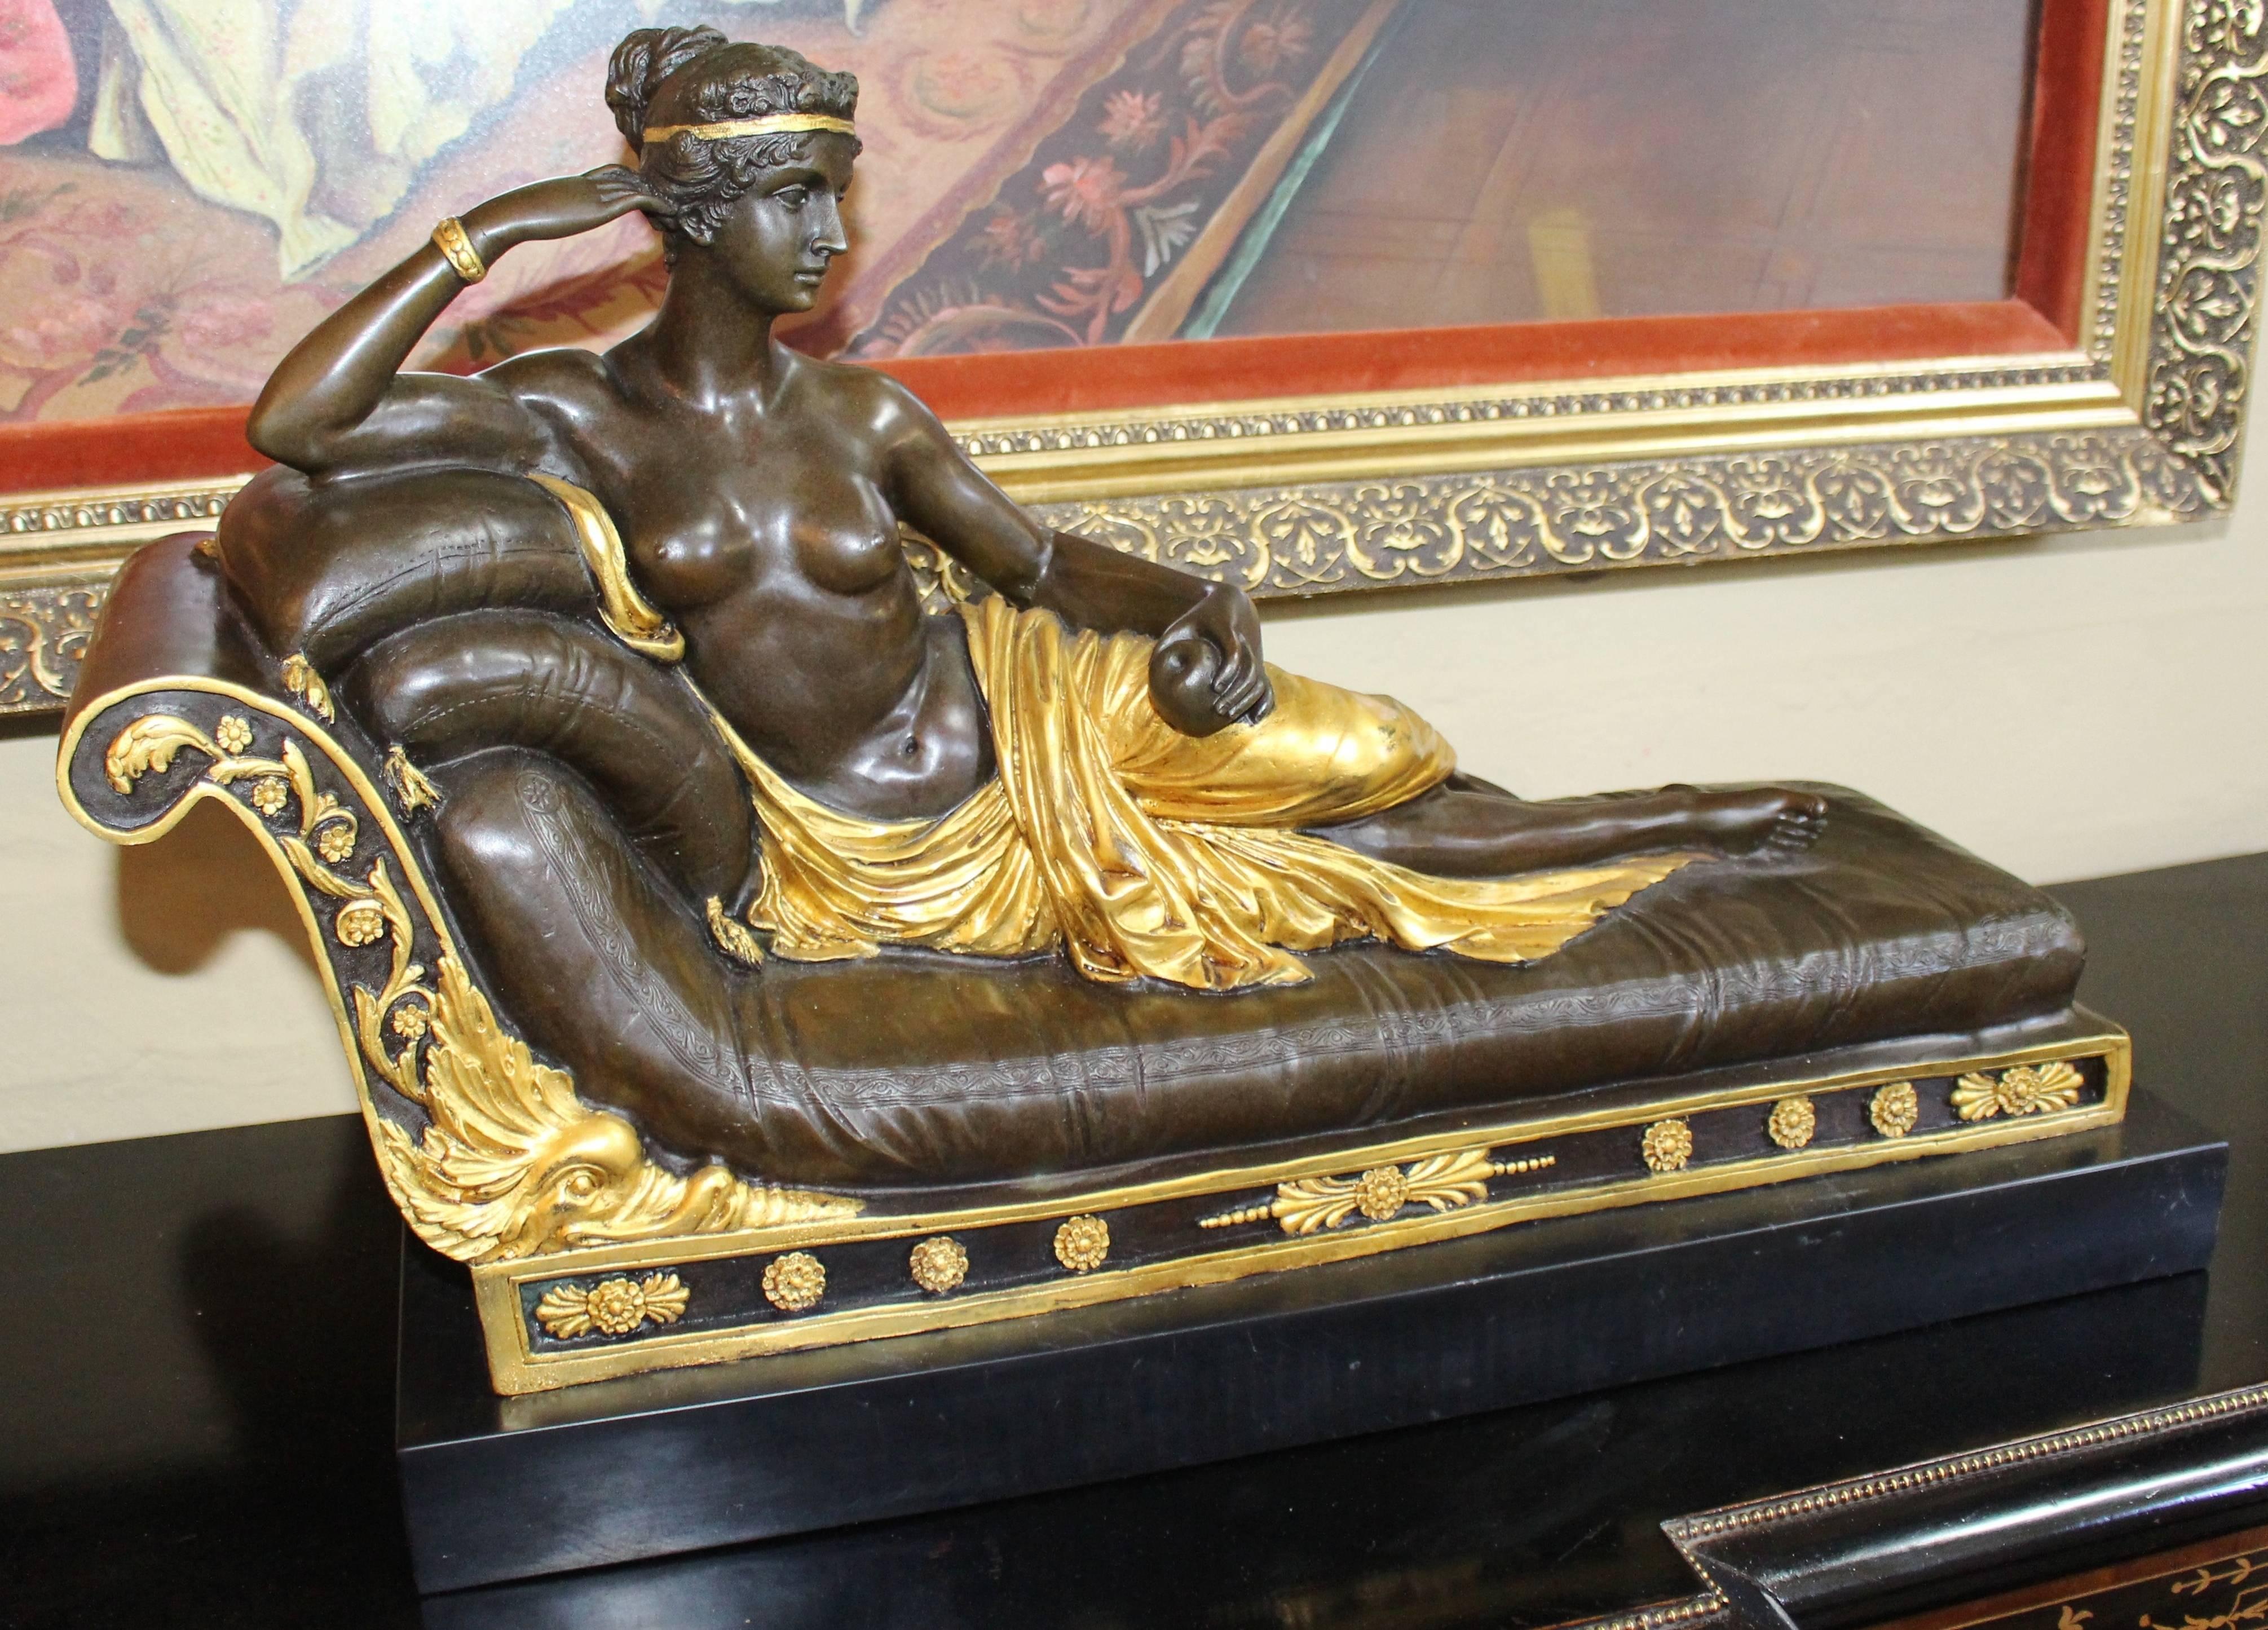 Period Regency style, late 20th century
Subject Classical style reclining figure
Measures: Width 52 cm / 20 1/2 in
Depth 19 cm / 7 1/2 in
Height 33.5 cm / 13 1/4 in
Composition bronze on marble/slate base
Condition very good condition